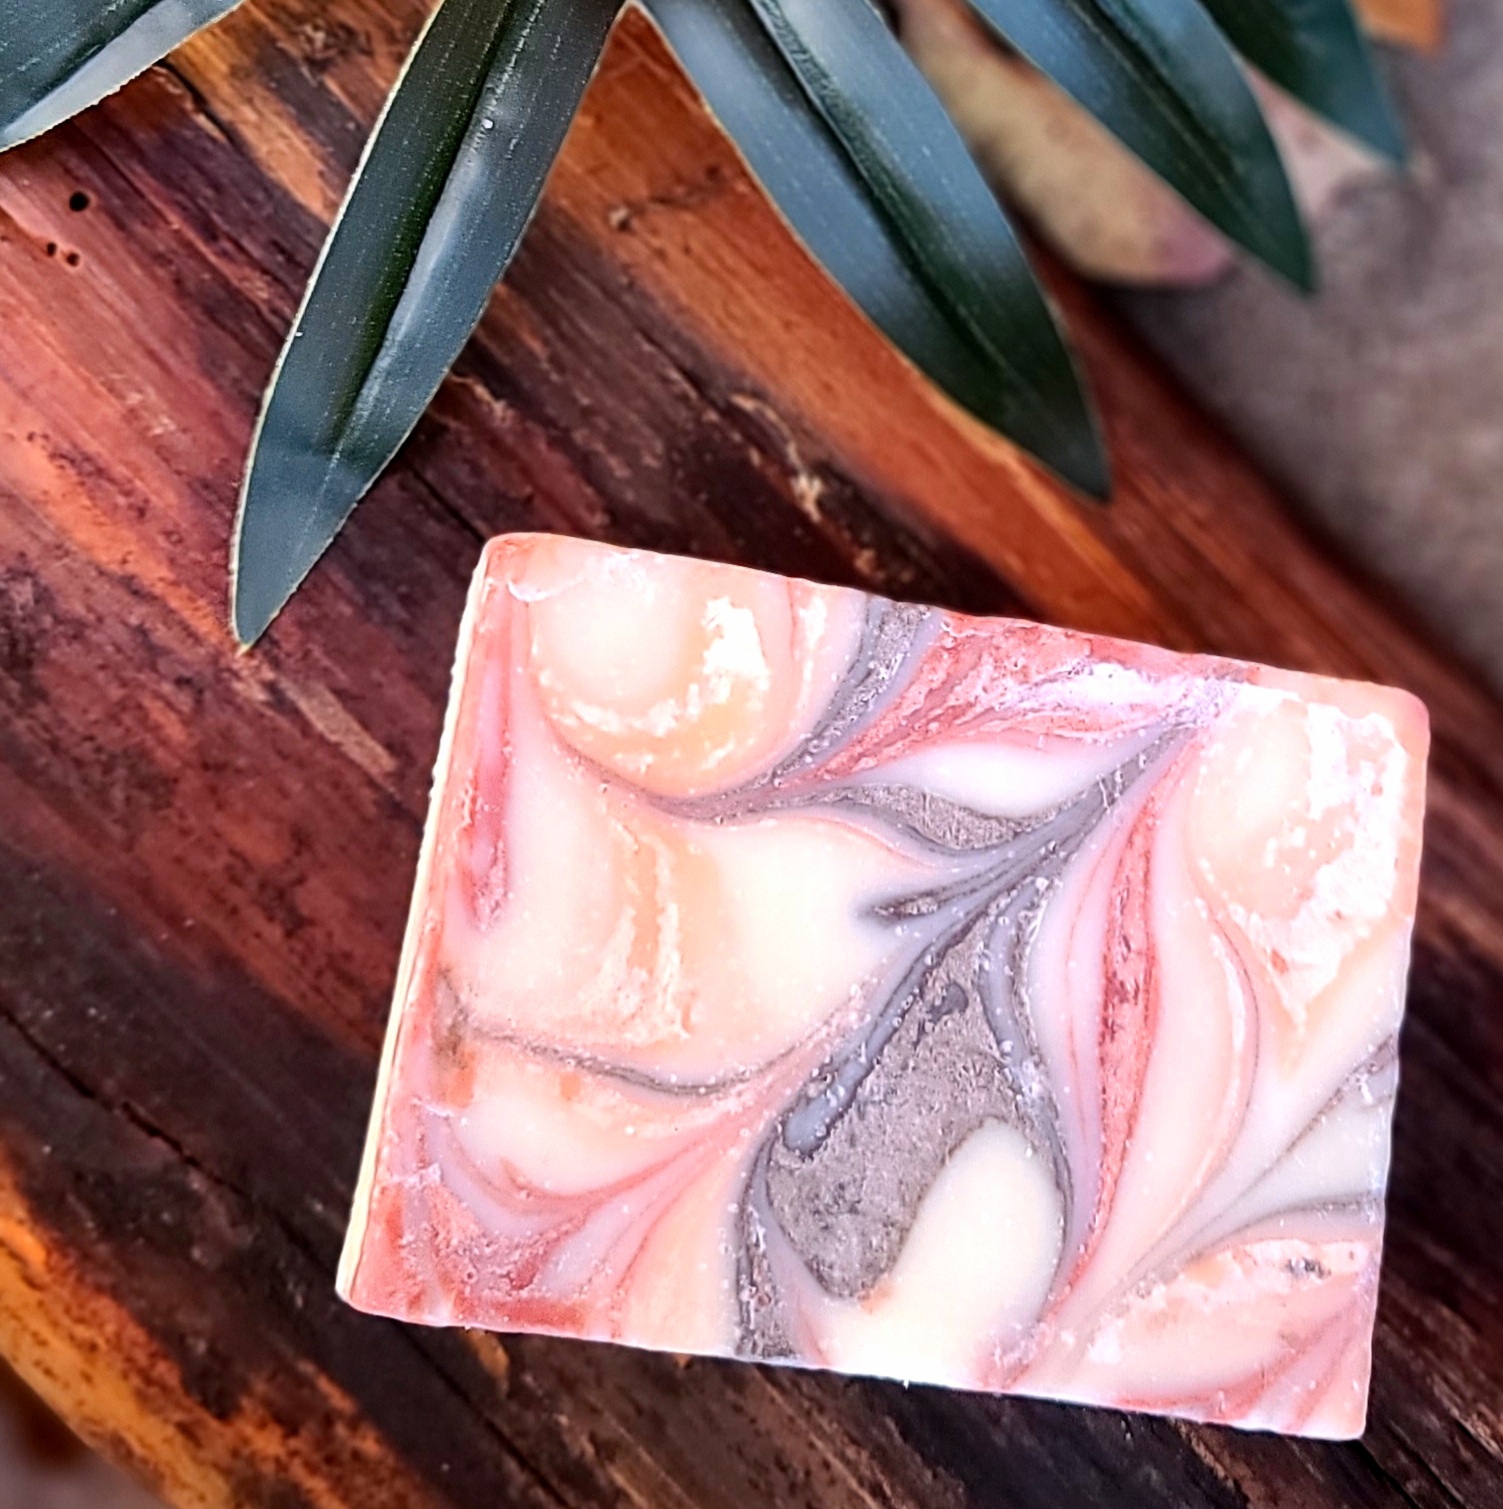 Cognac and Cubans Handcrafted Soap